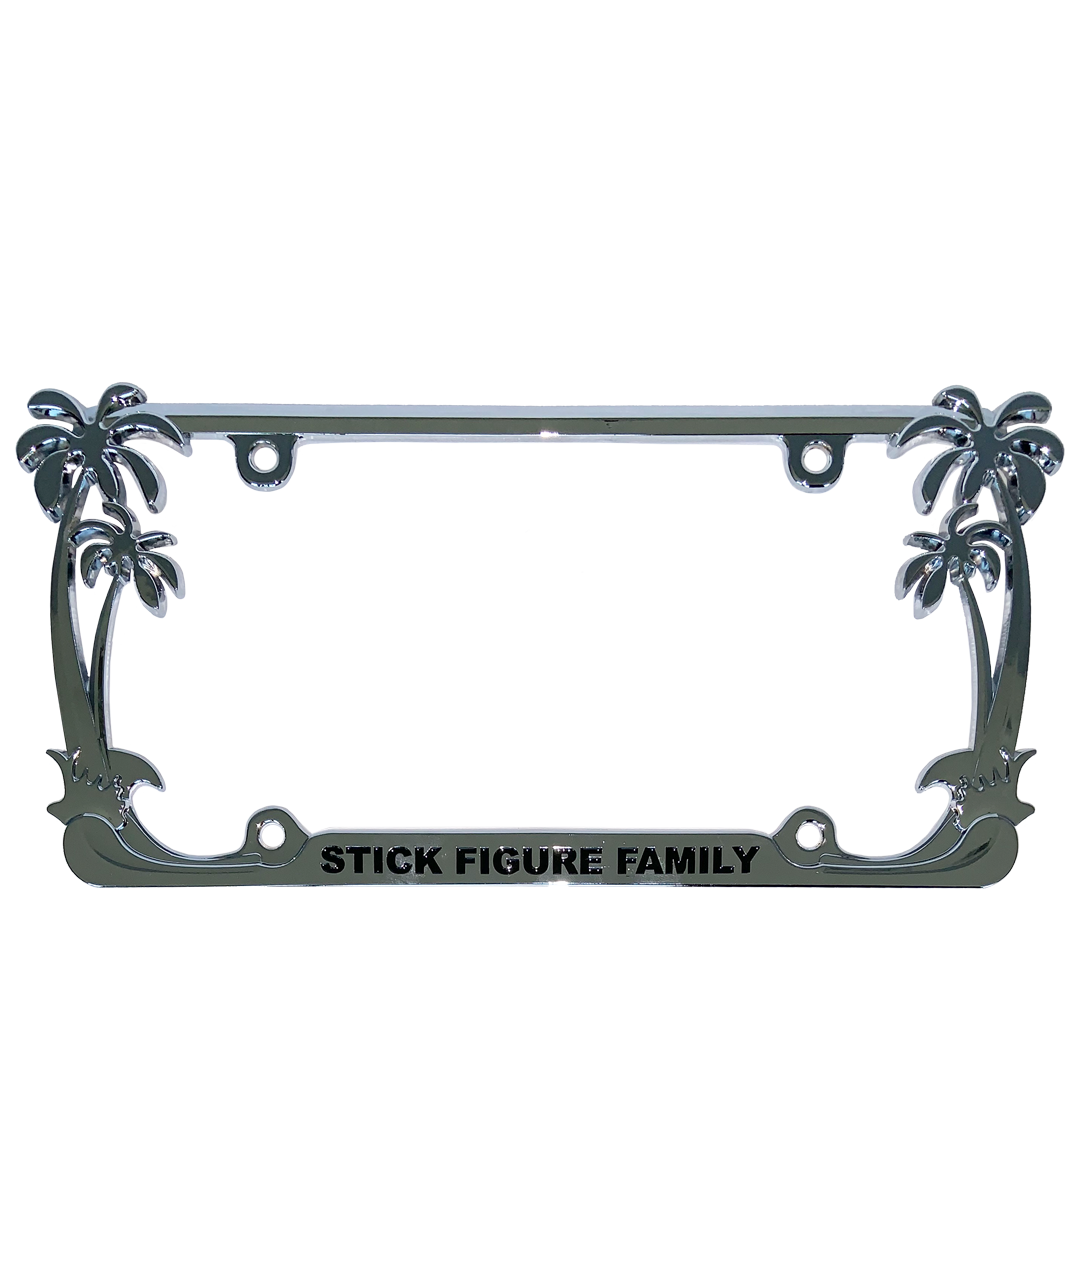 Stick Figure Family Metal License Plate Frame